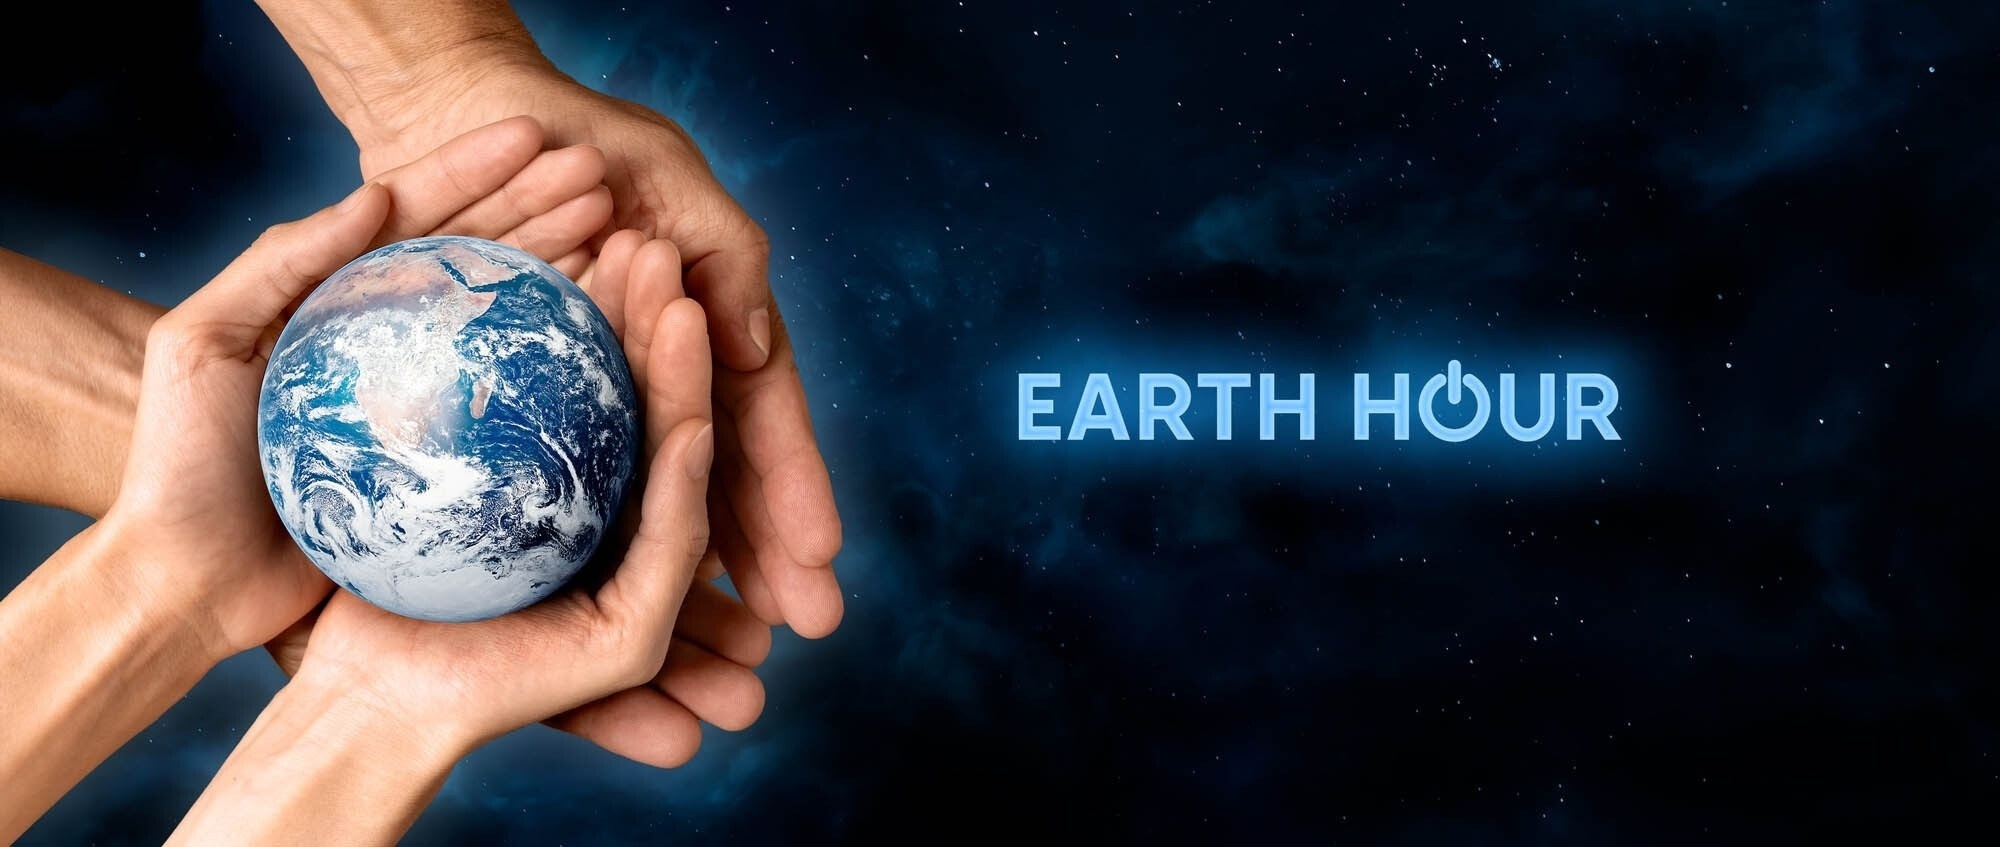 Earth Hour campaign